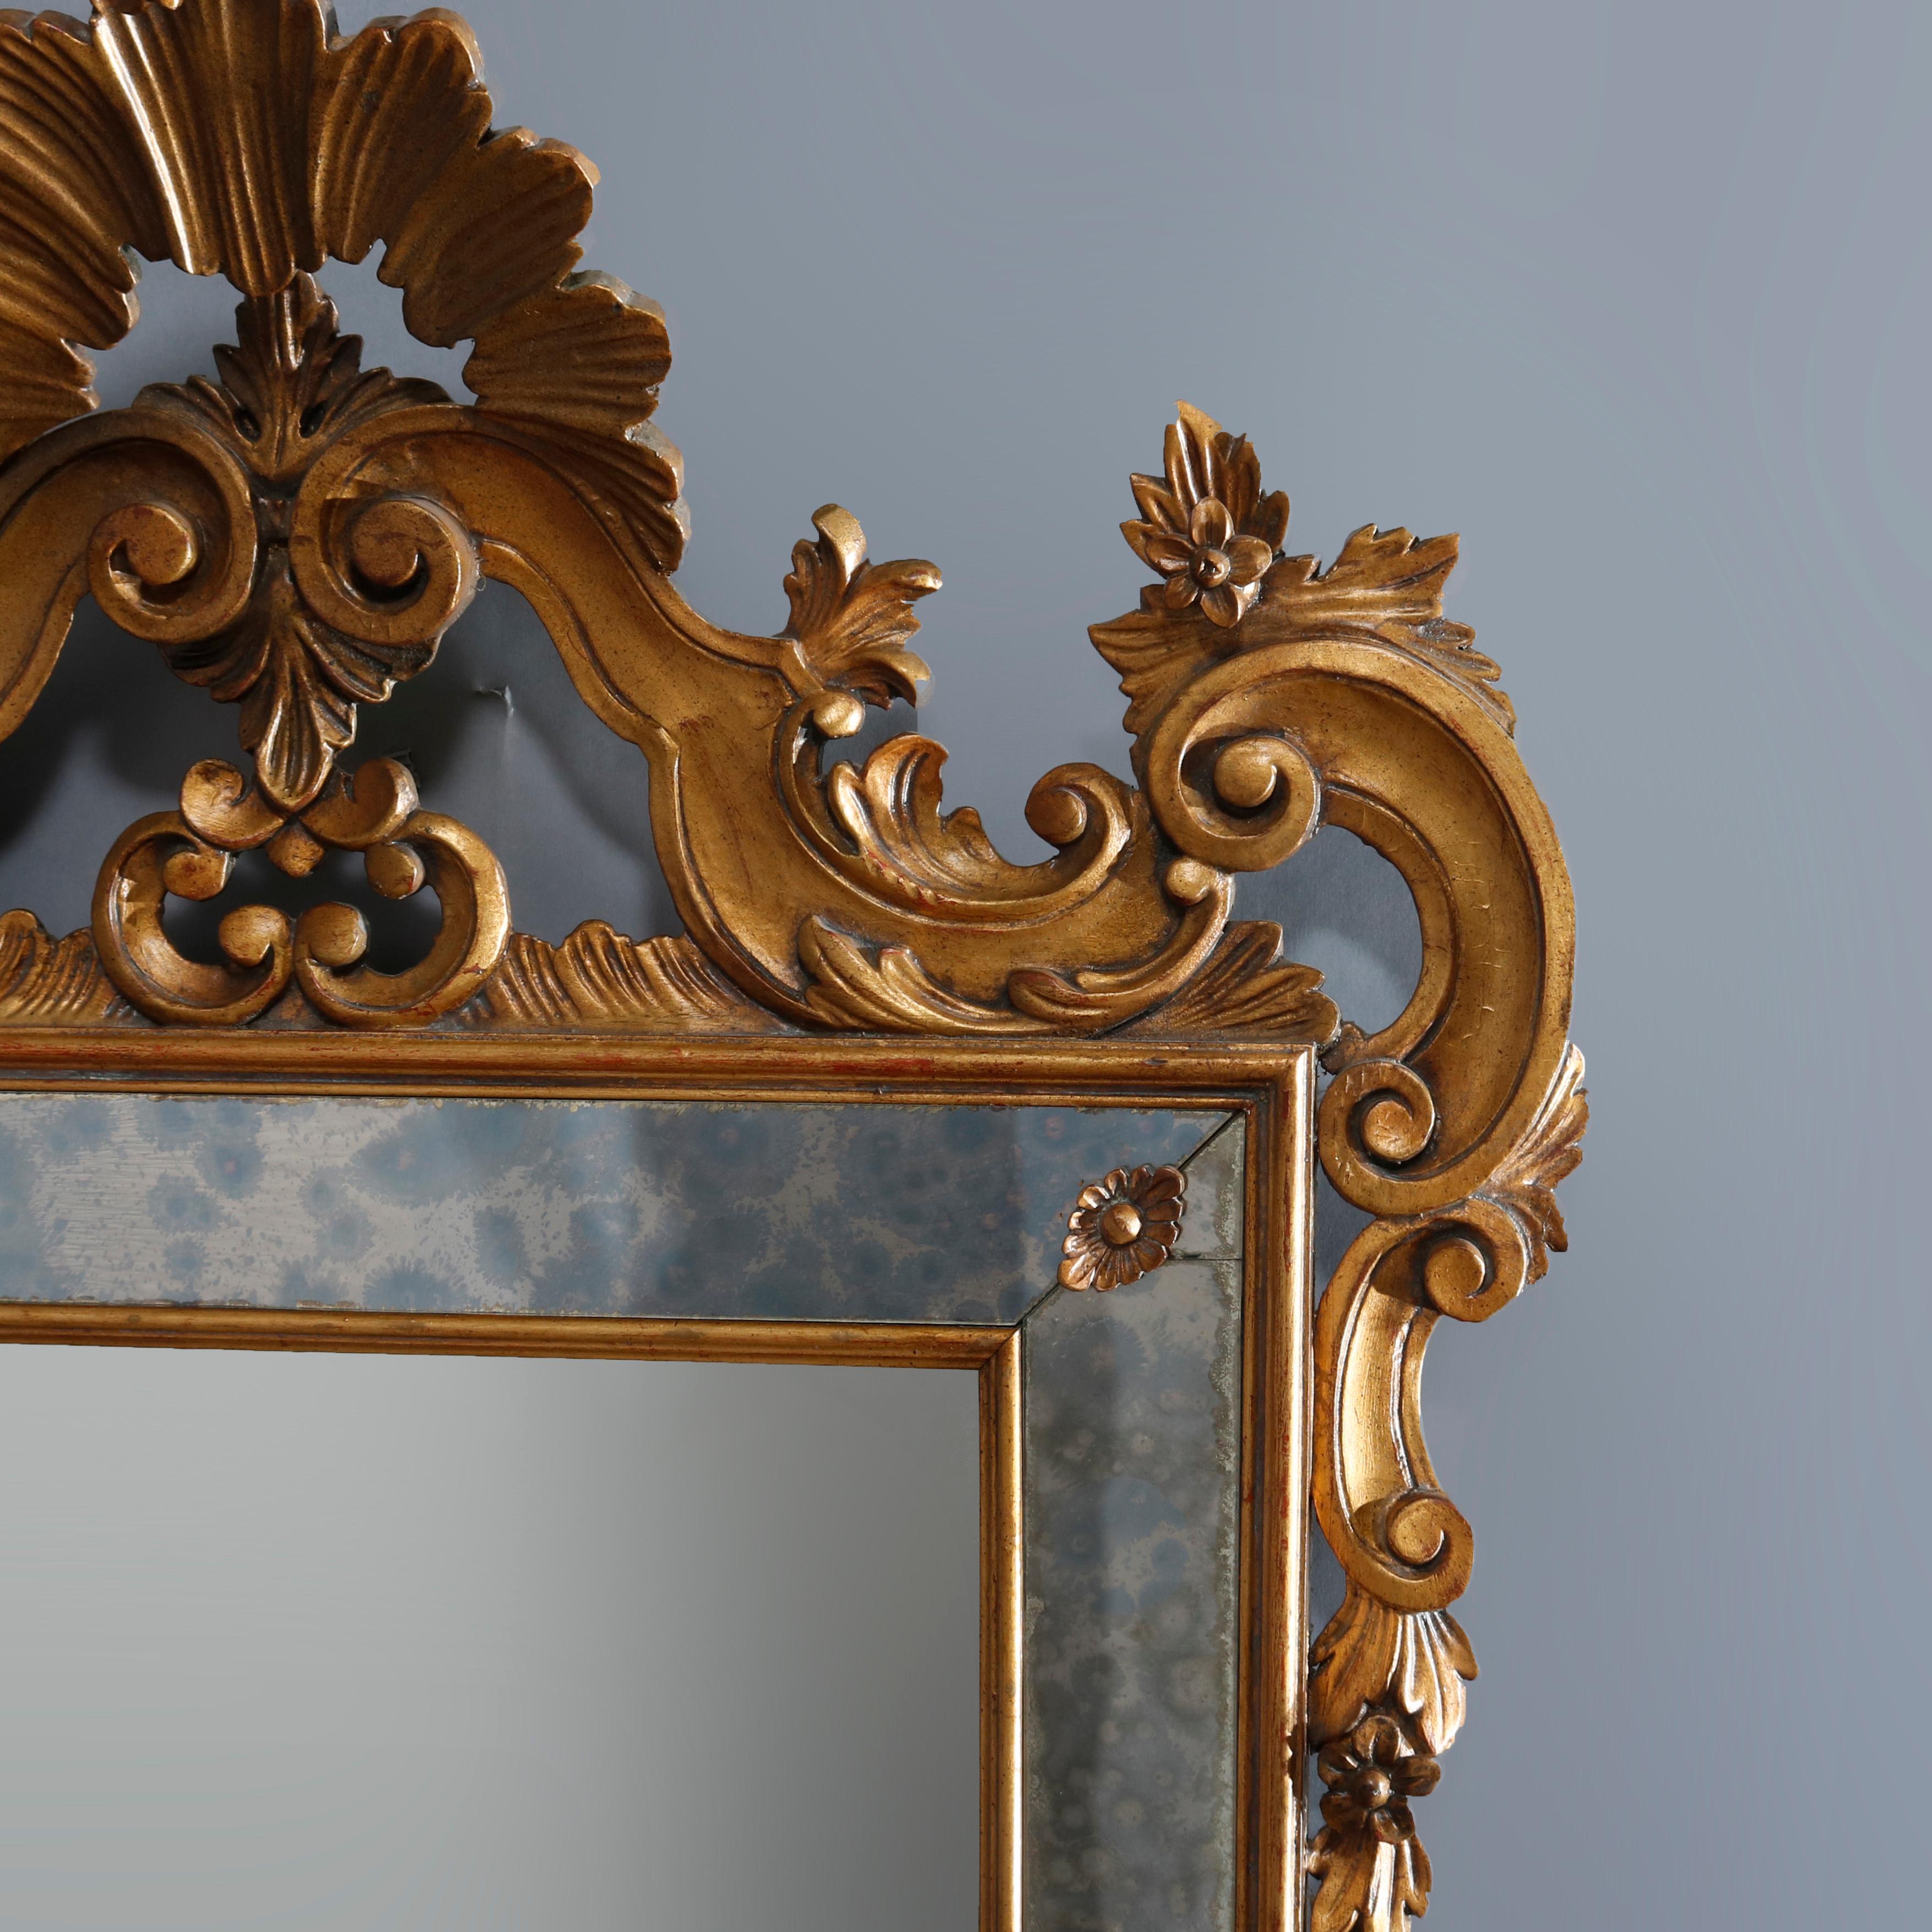 Vintage Italian Rococo Style Giltwood Parclose Over Mantel Mirror by Karges 2